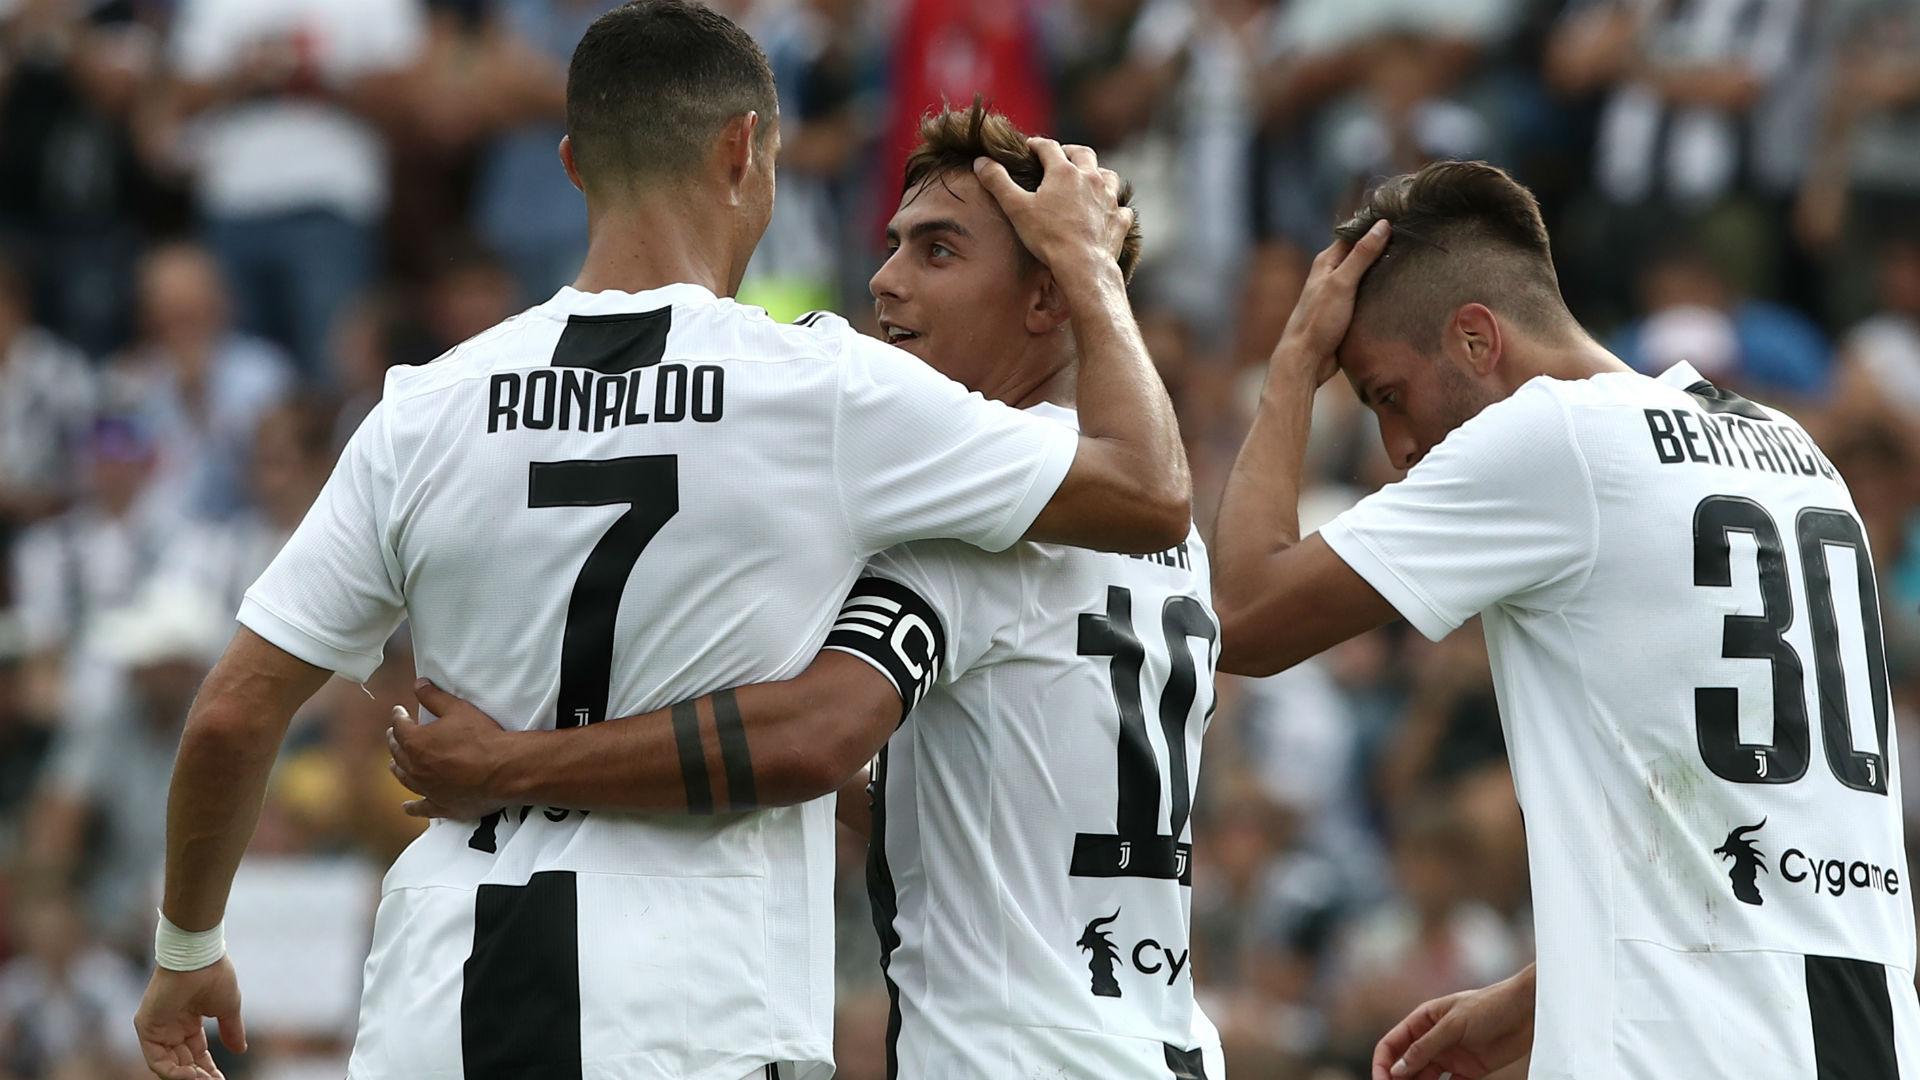 Paulo Dybala: things are going well with me and Ronaldo at Juventus